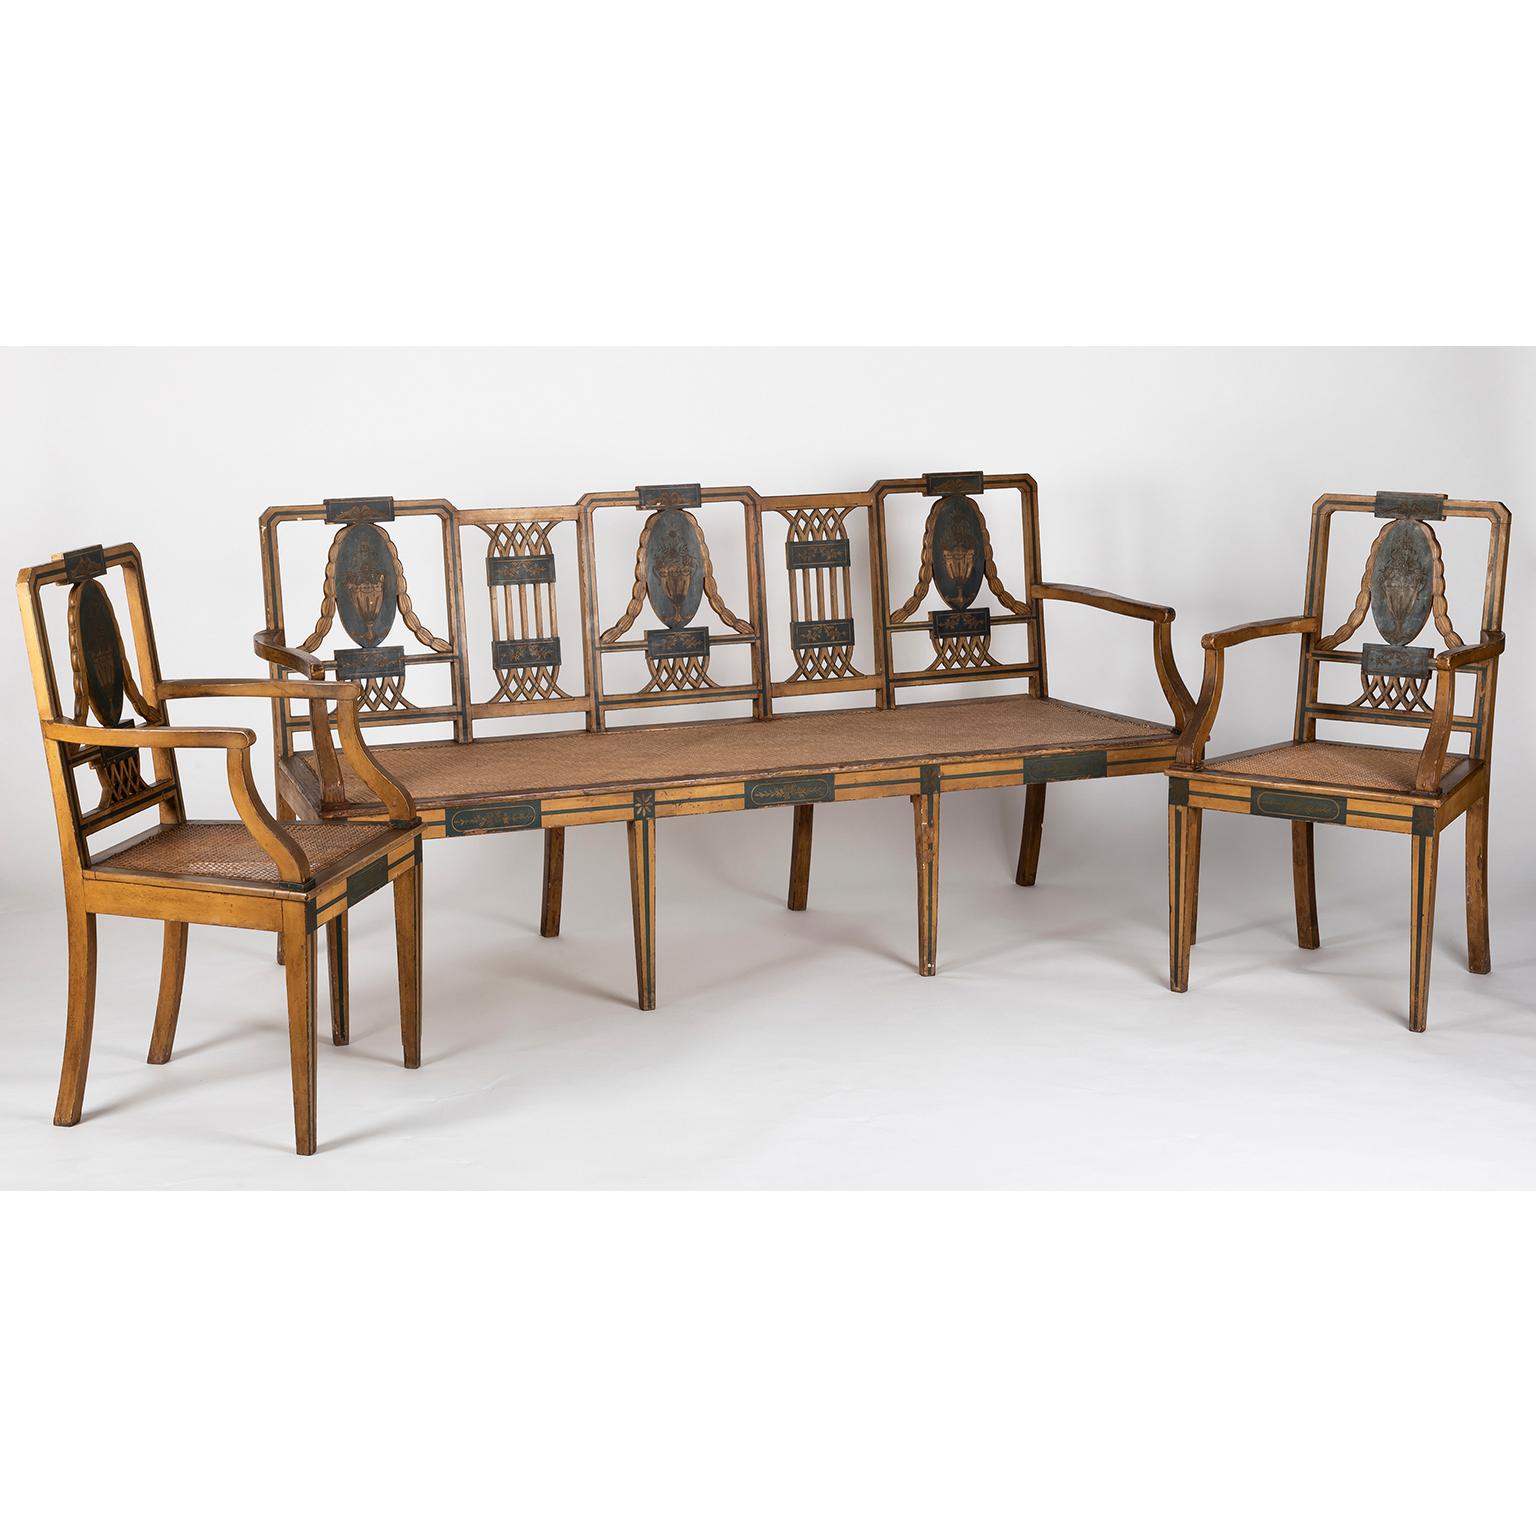 This Dona Maria set in painted and carved wood is composed by two armchairs and a canapé . 

It was produced in Portugal in the late 19th century and it has very few restoring work, maintaining its original patina.

The set has its backs fully